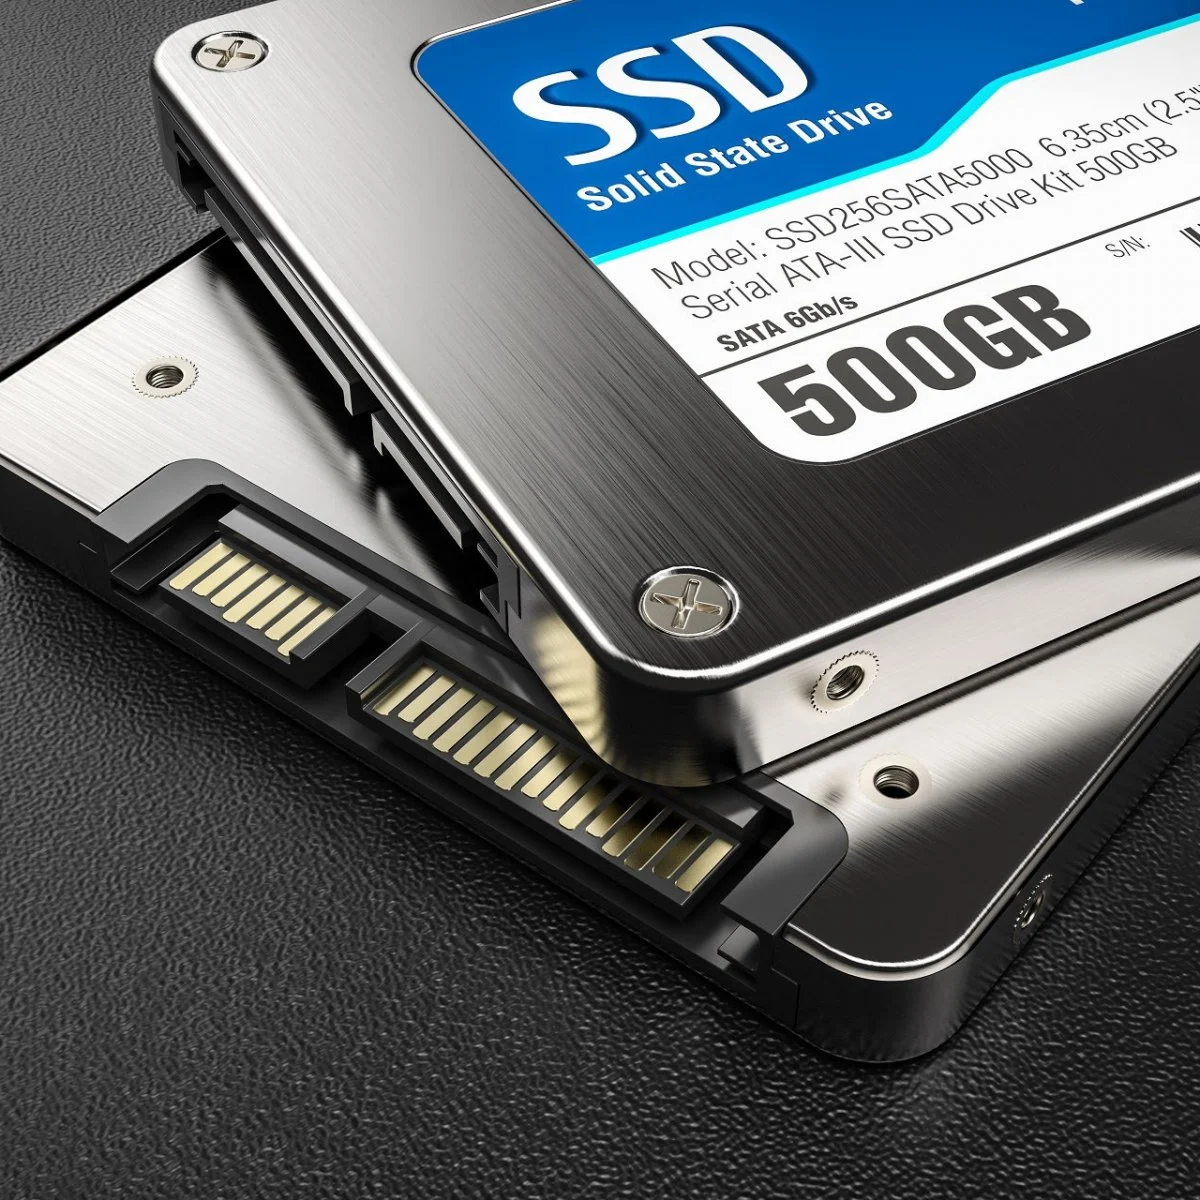 How Large Of A SSD Do I Need For Windows 10